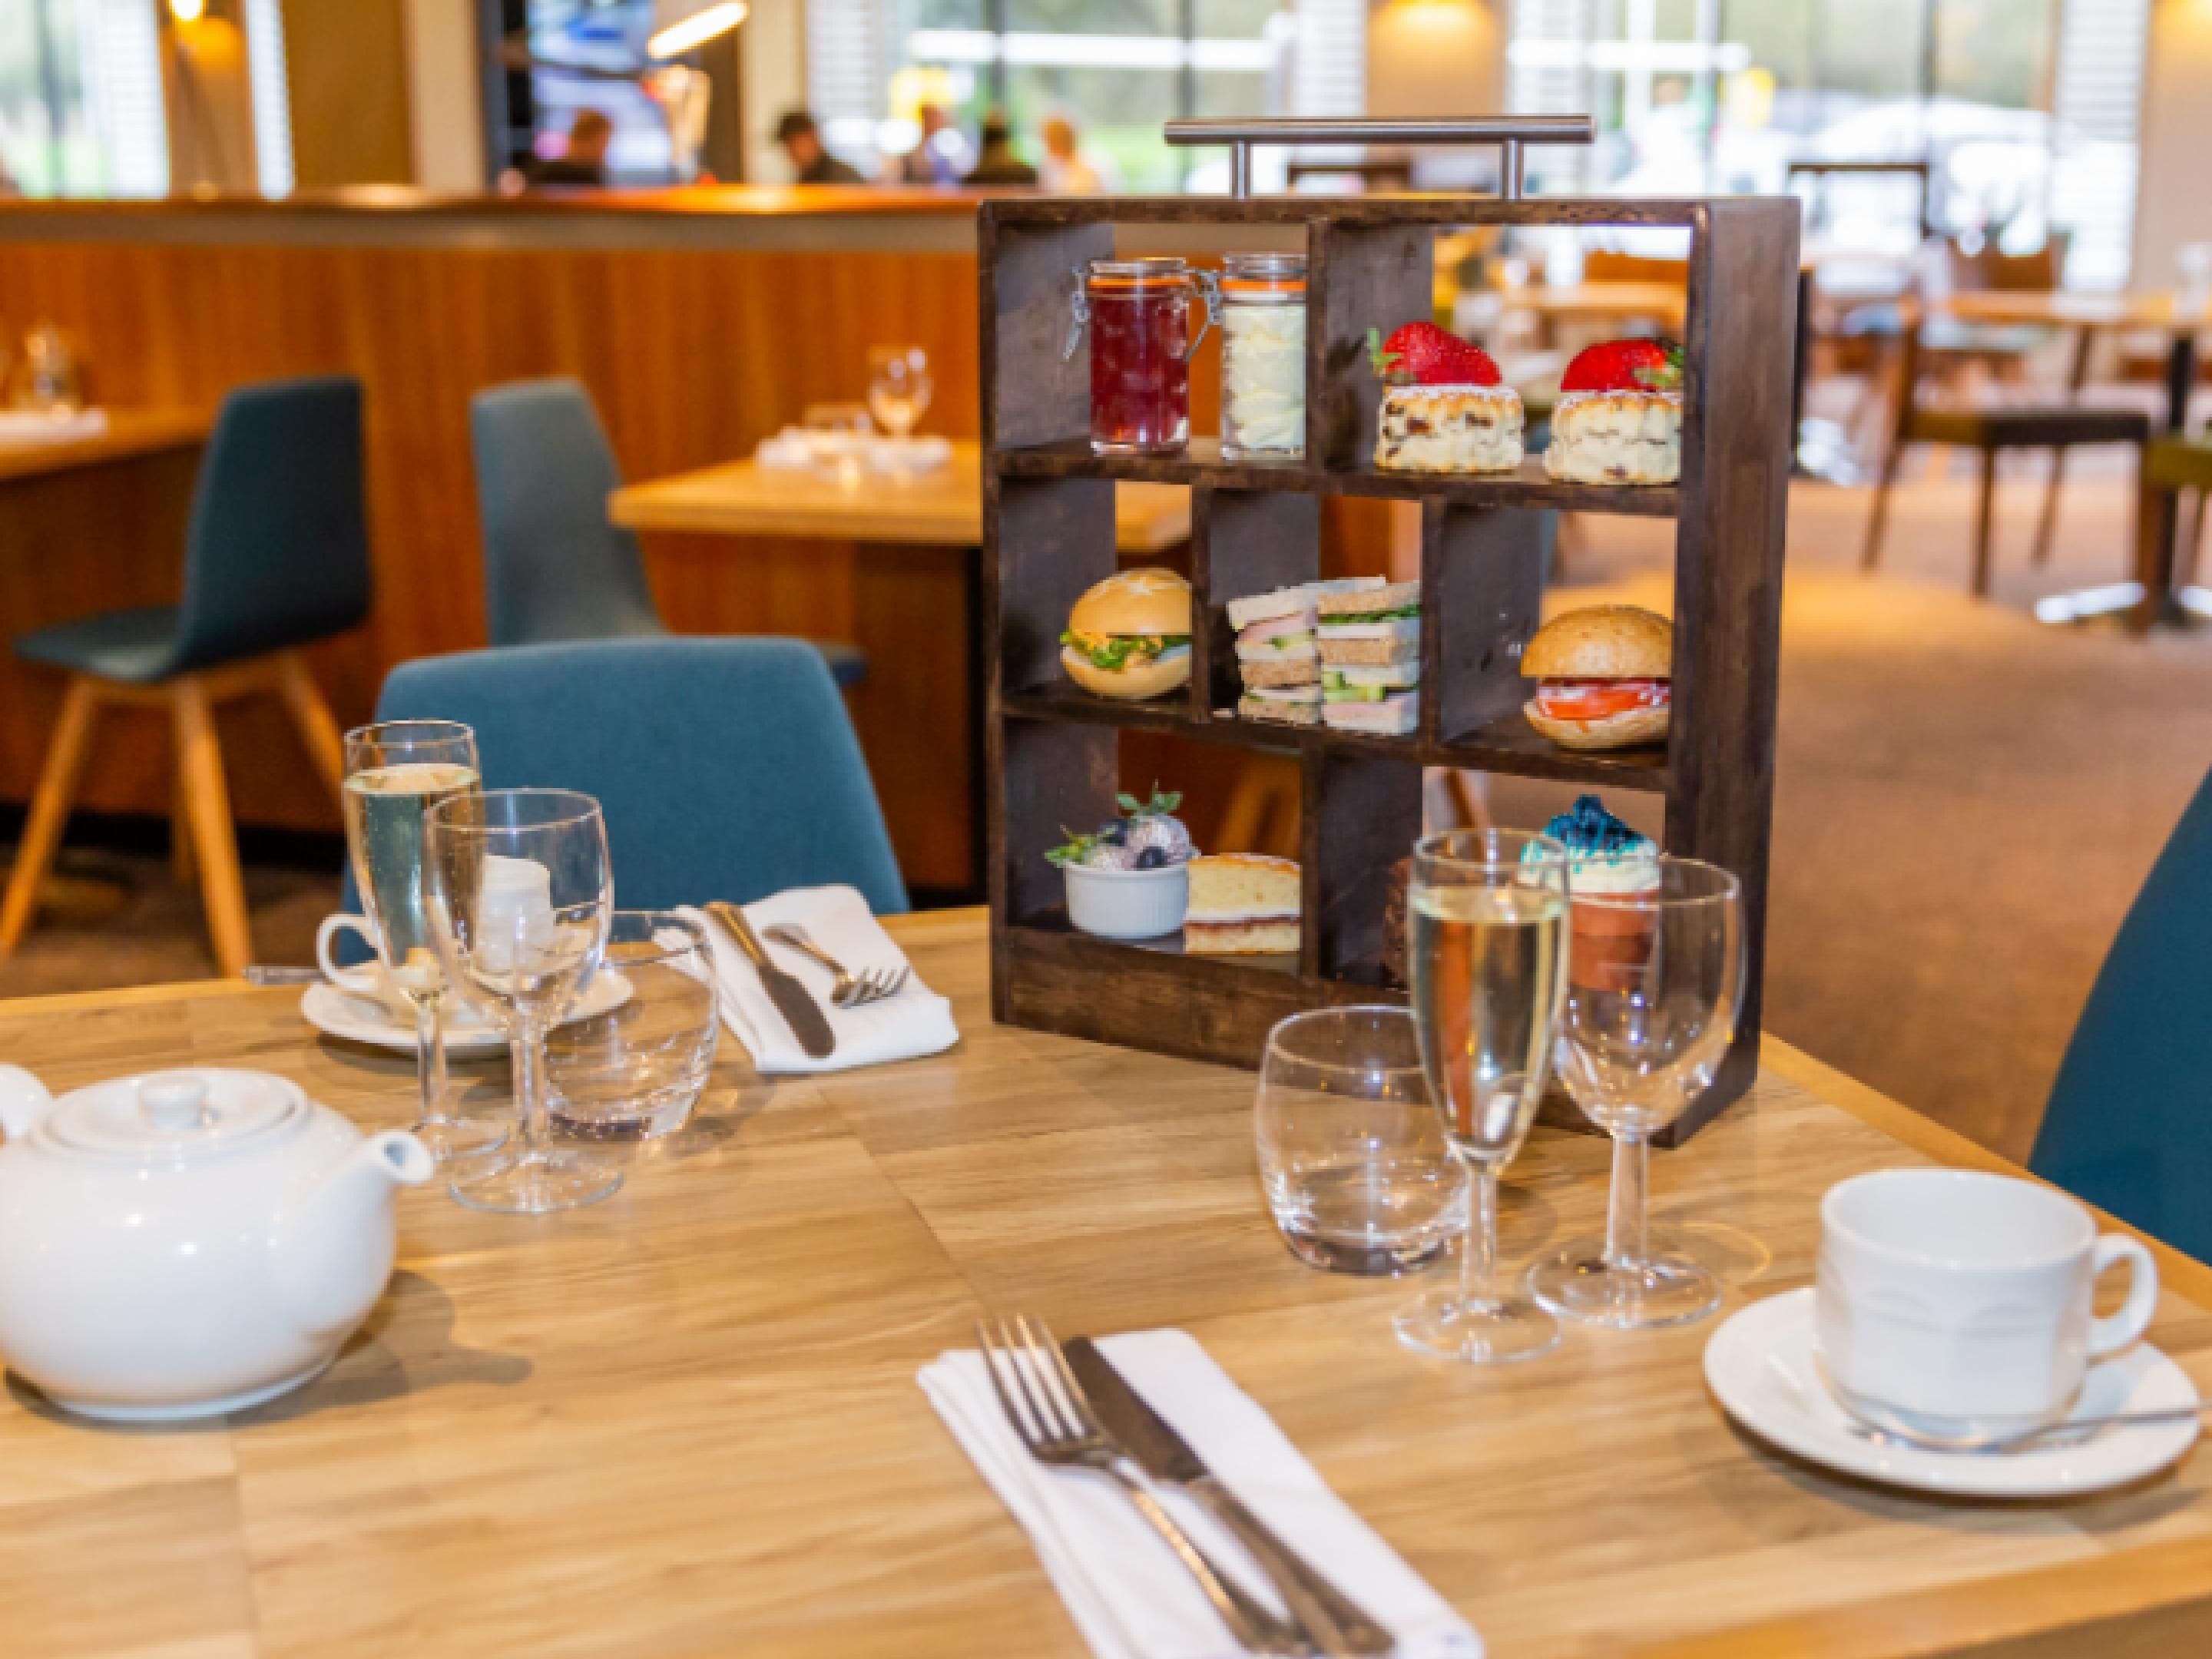 Whether you are a guest of a visitor, our Restaurant and Bar is open to all. Proudly serving Starbucks and providing an all-day menu to suit all.

Looking for somewhere to work or meet a colleague? Our bar area is the perfect location and provides free Wi-Fi.